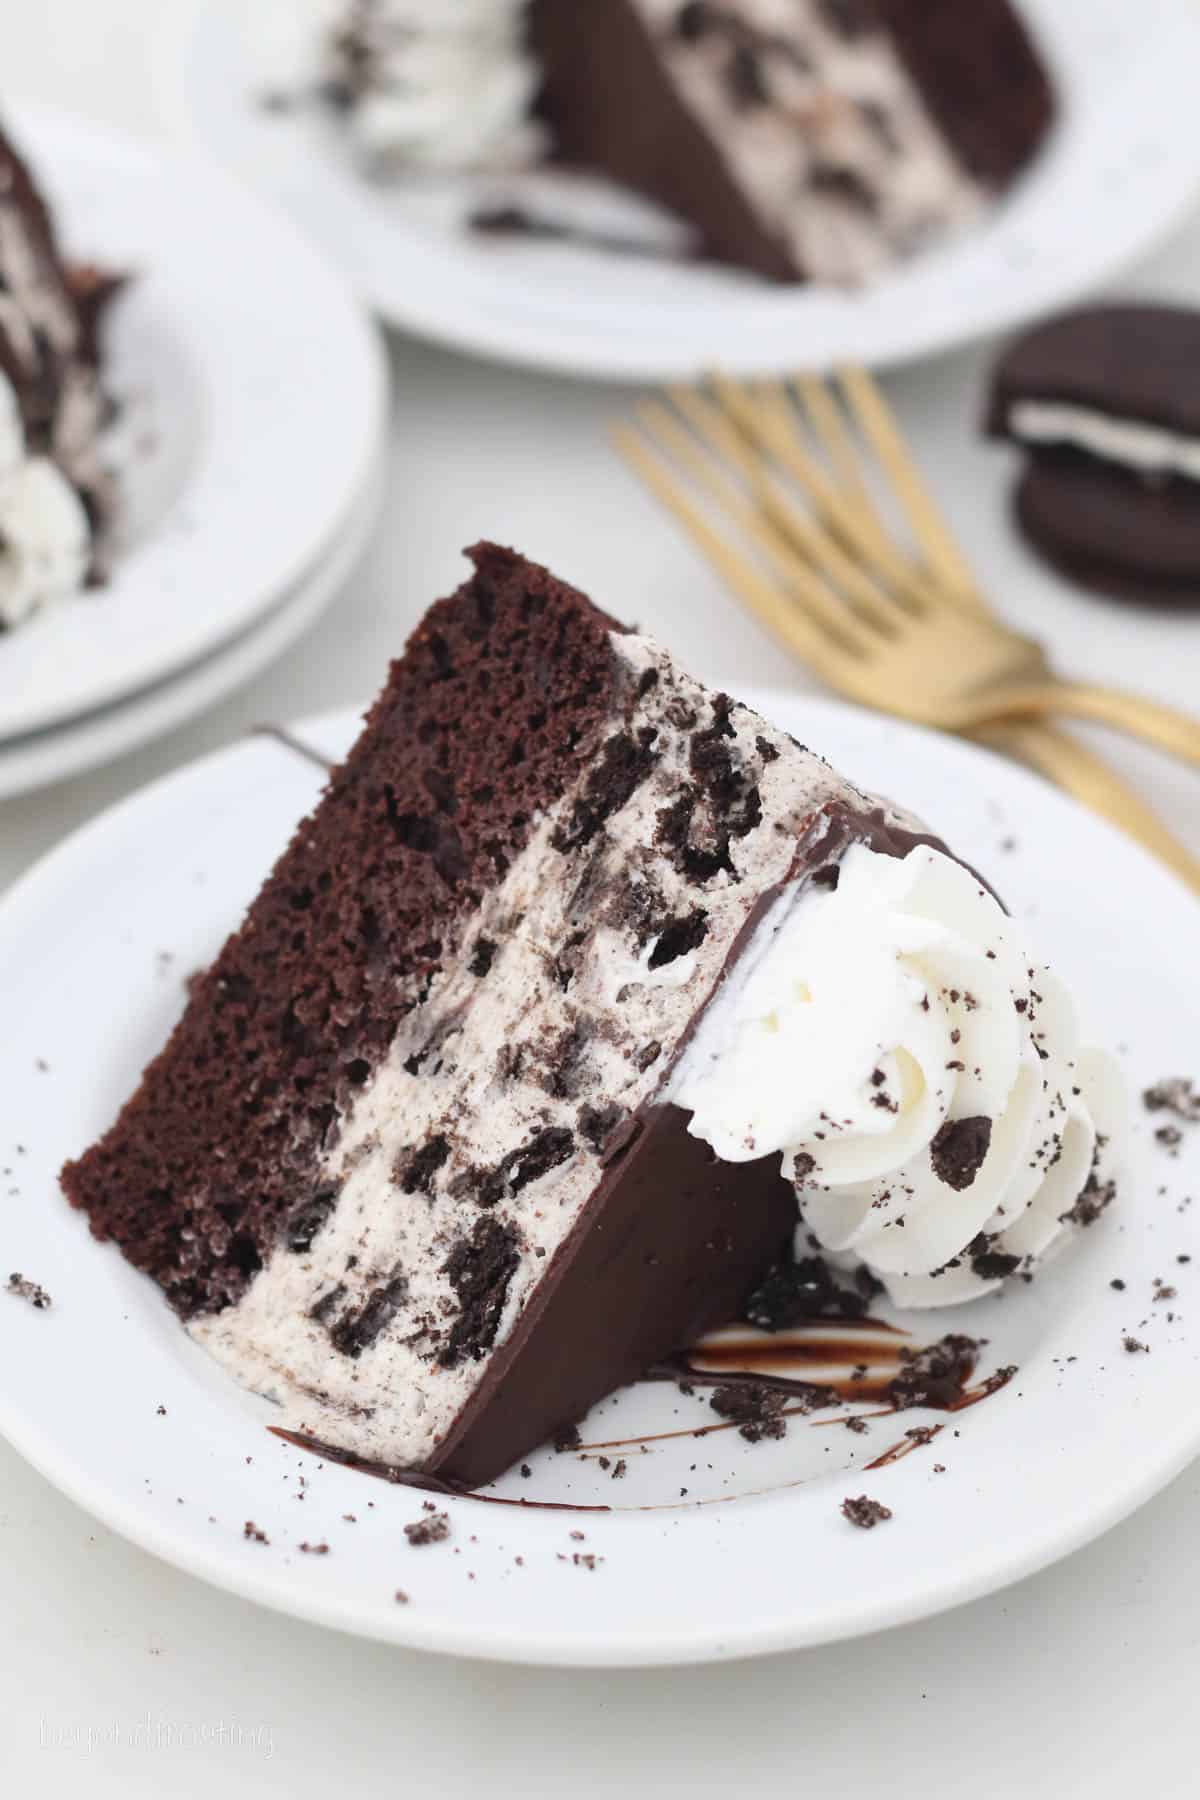 A slice of Oreo ice cream cake on its side on a white plate.